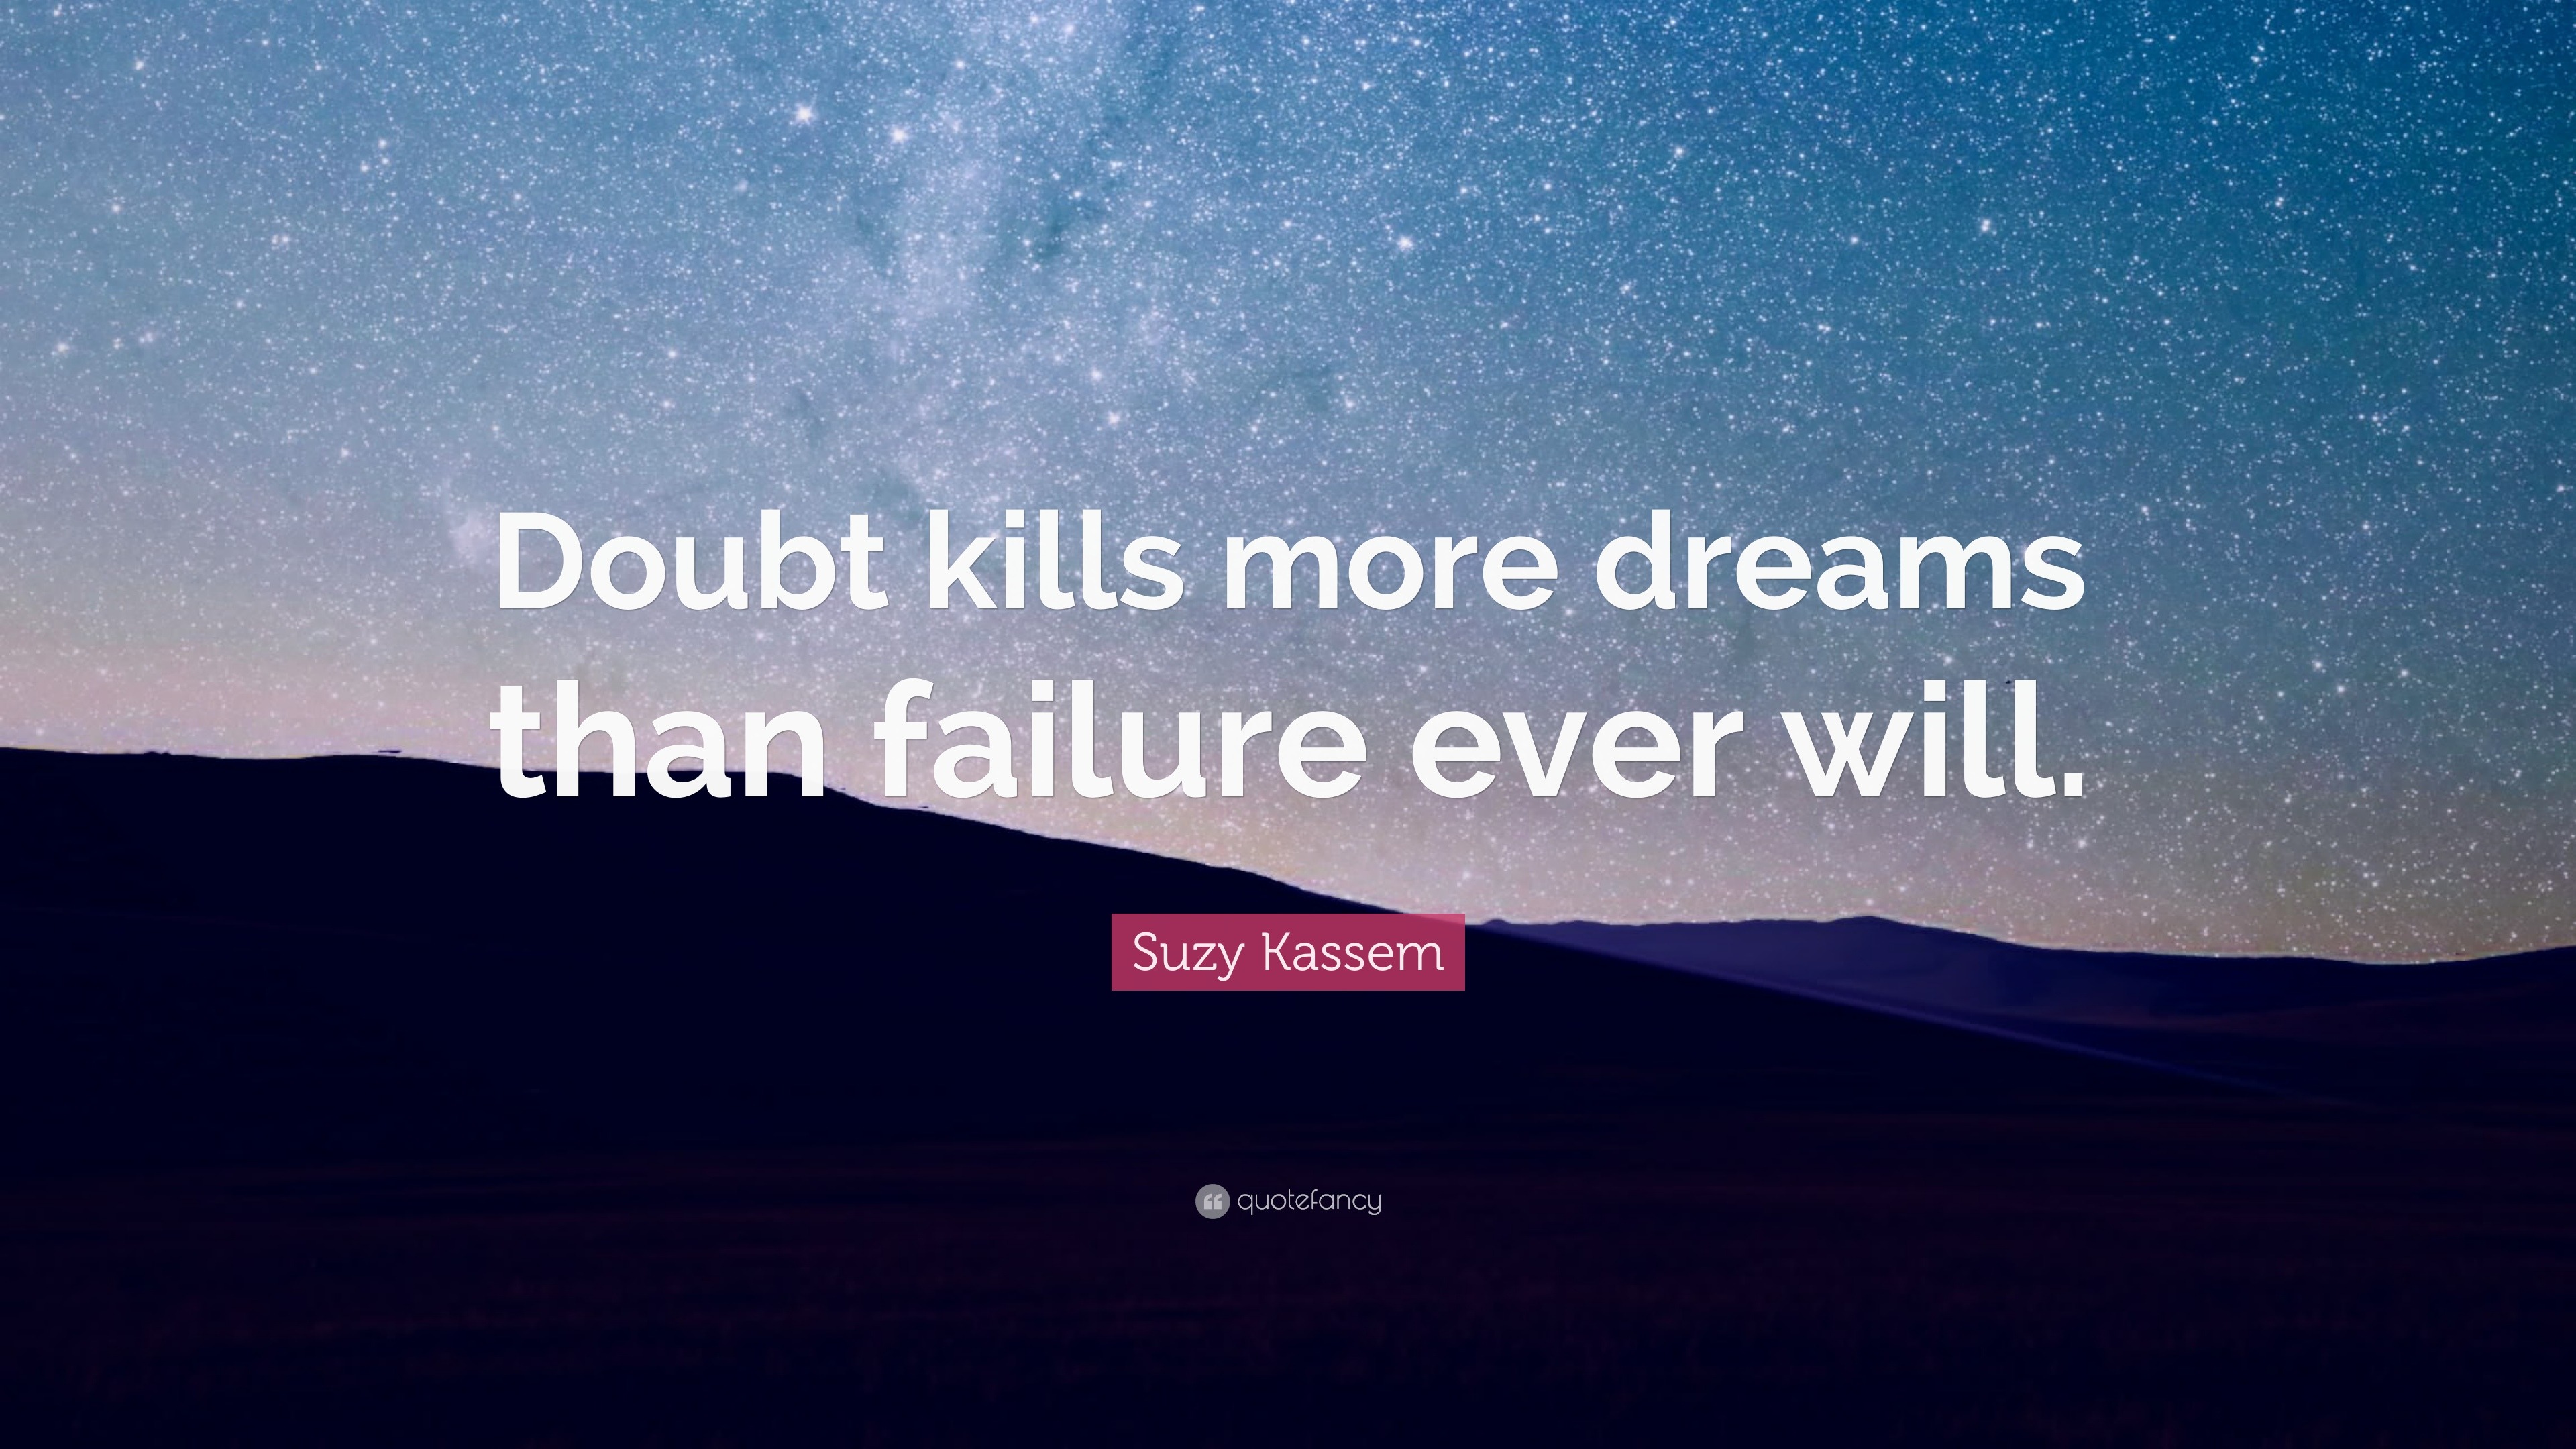 Suzy Kassem Quote: “Doubt kills more dreams than failure ever will